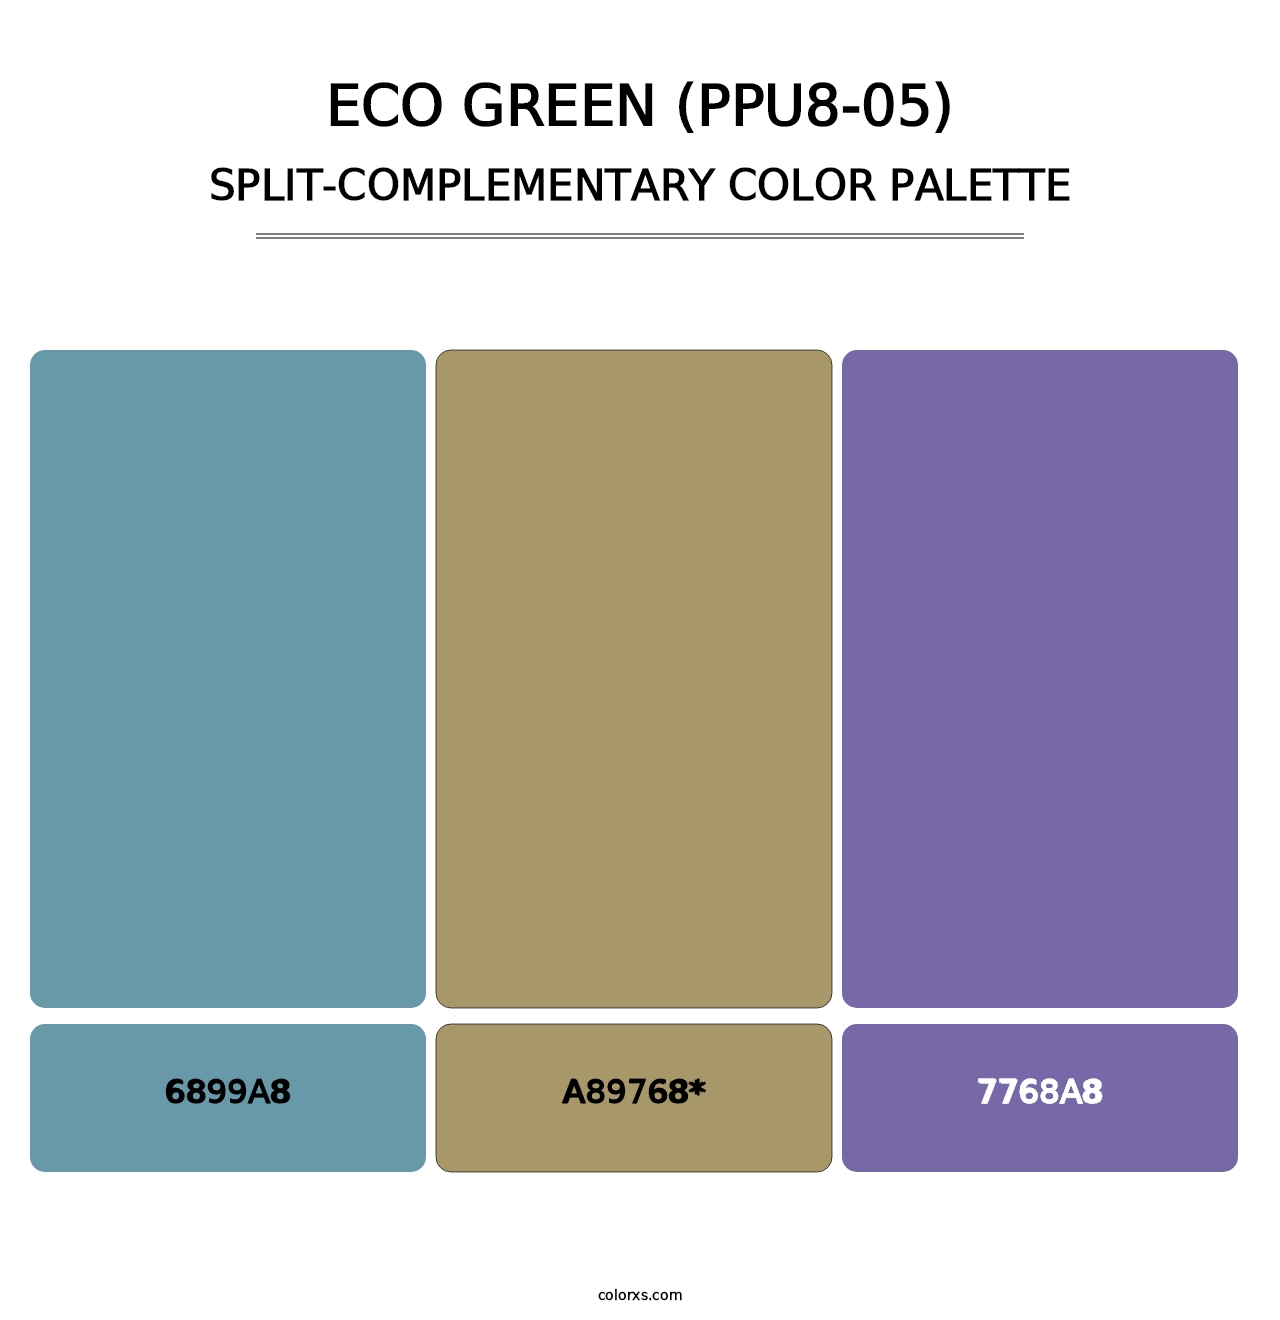 Eco Green (PPU8-05) - Split-Complementary Color Palette